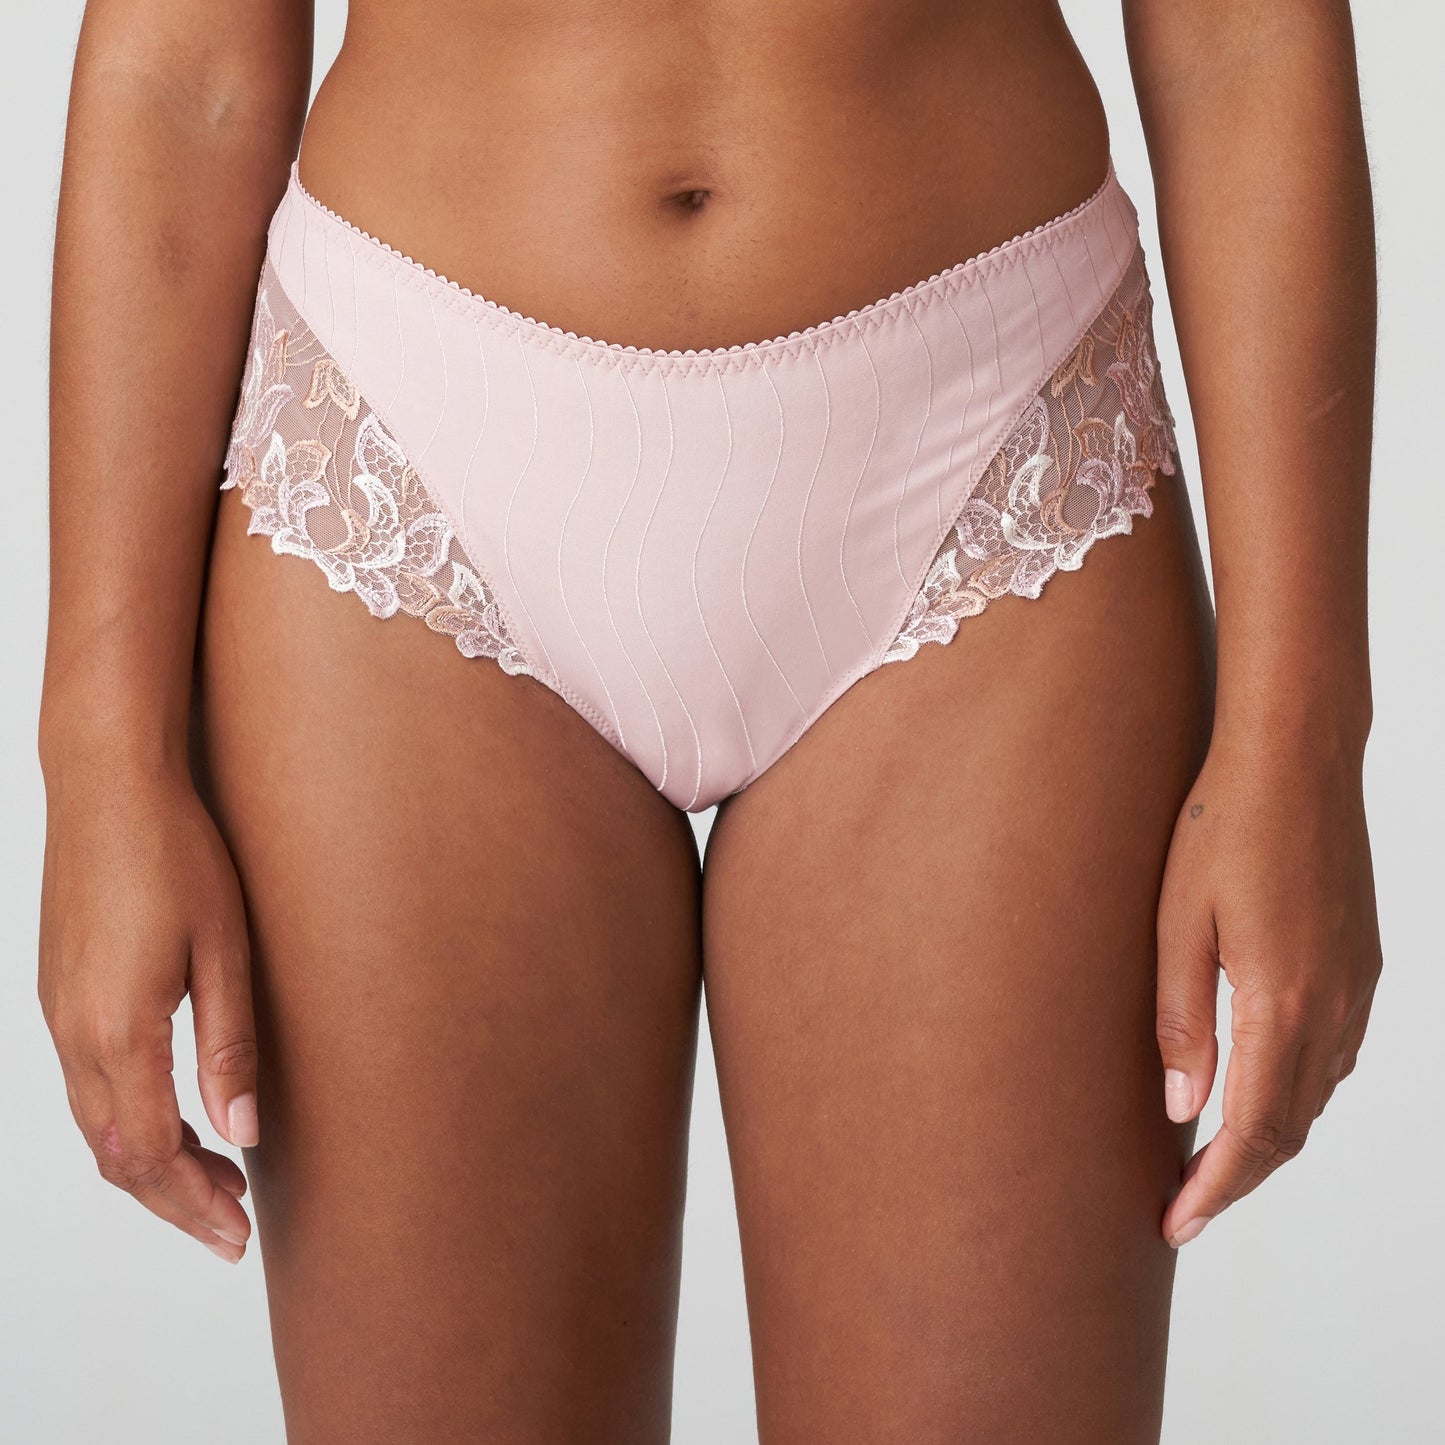 Woman wearing the Deauville Luxury Thong with elegant lace in Vintage Pink by Primadonna.